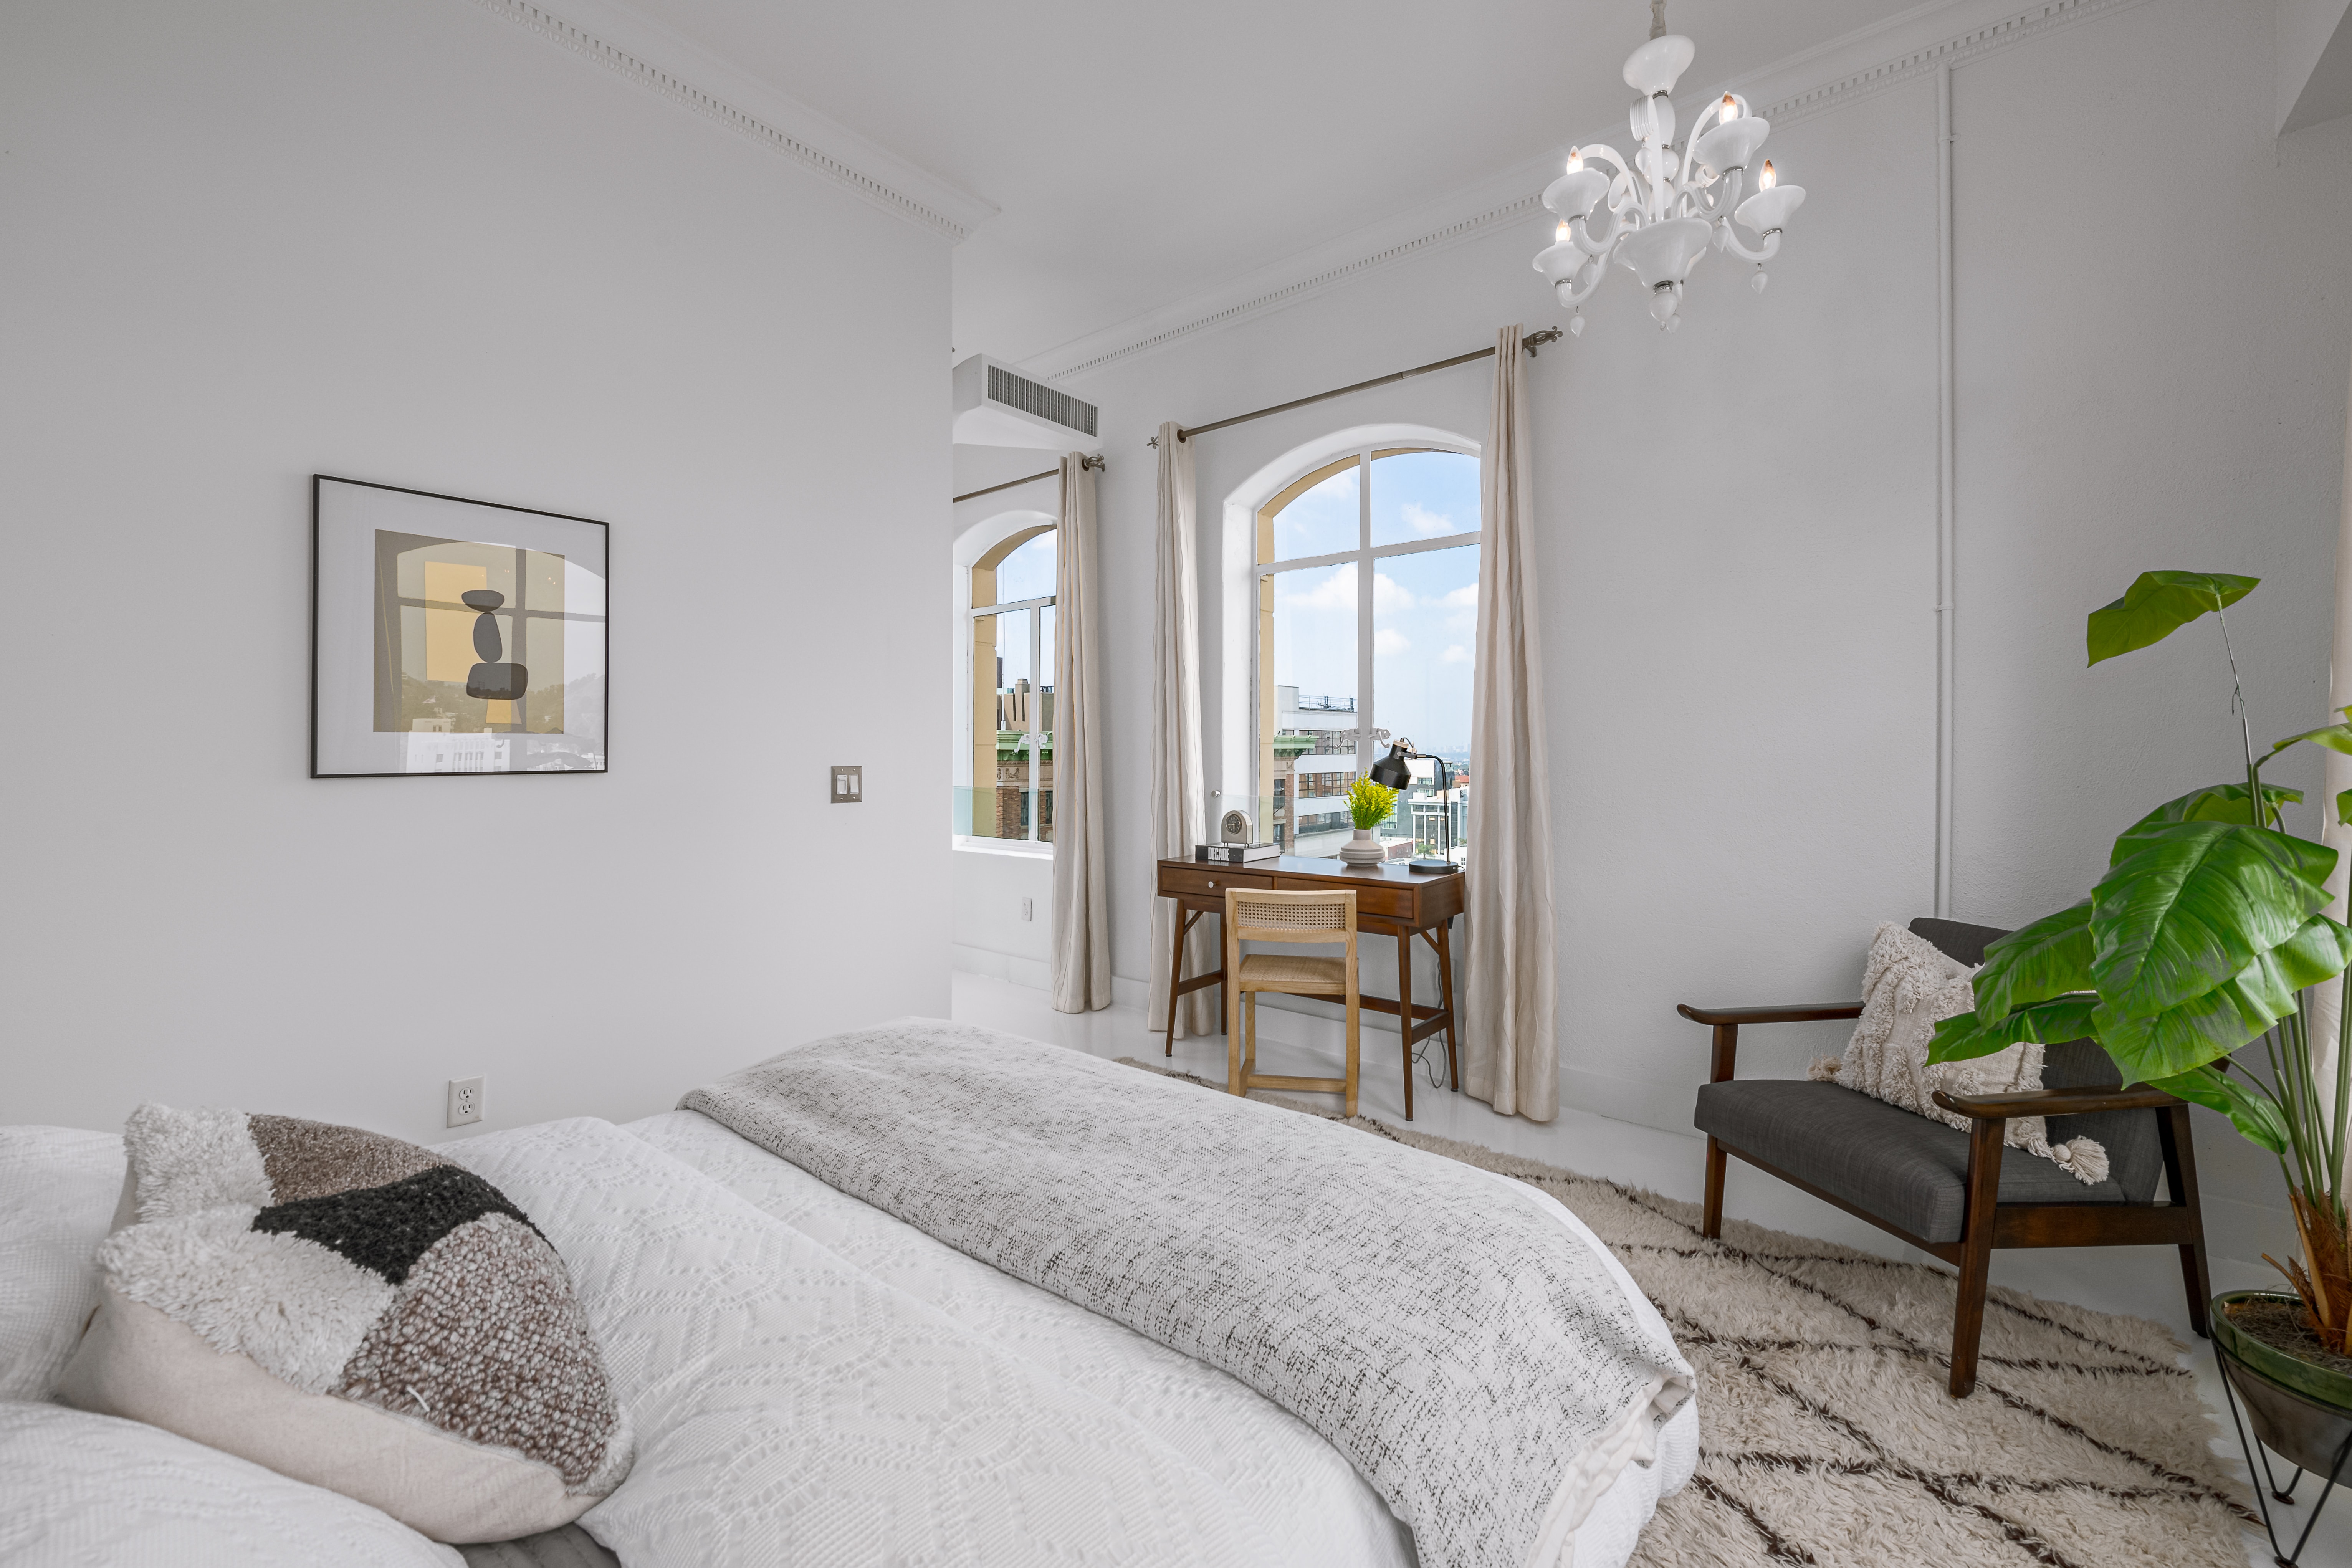 Dramatic white walls and arched windows in this spacious primary suite. Incredible views.